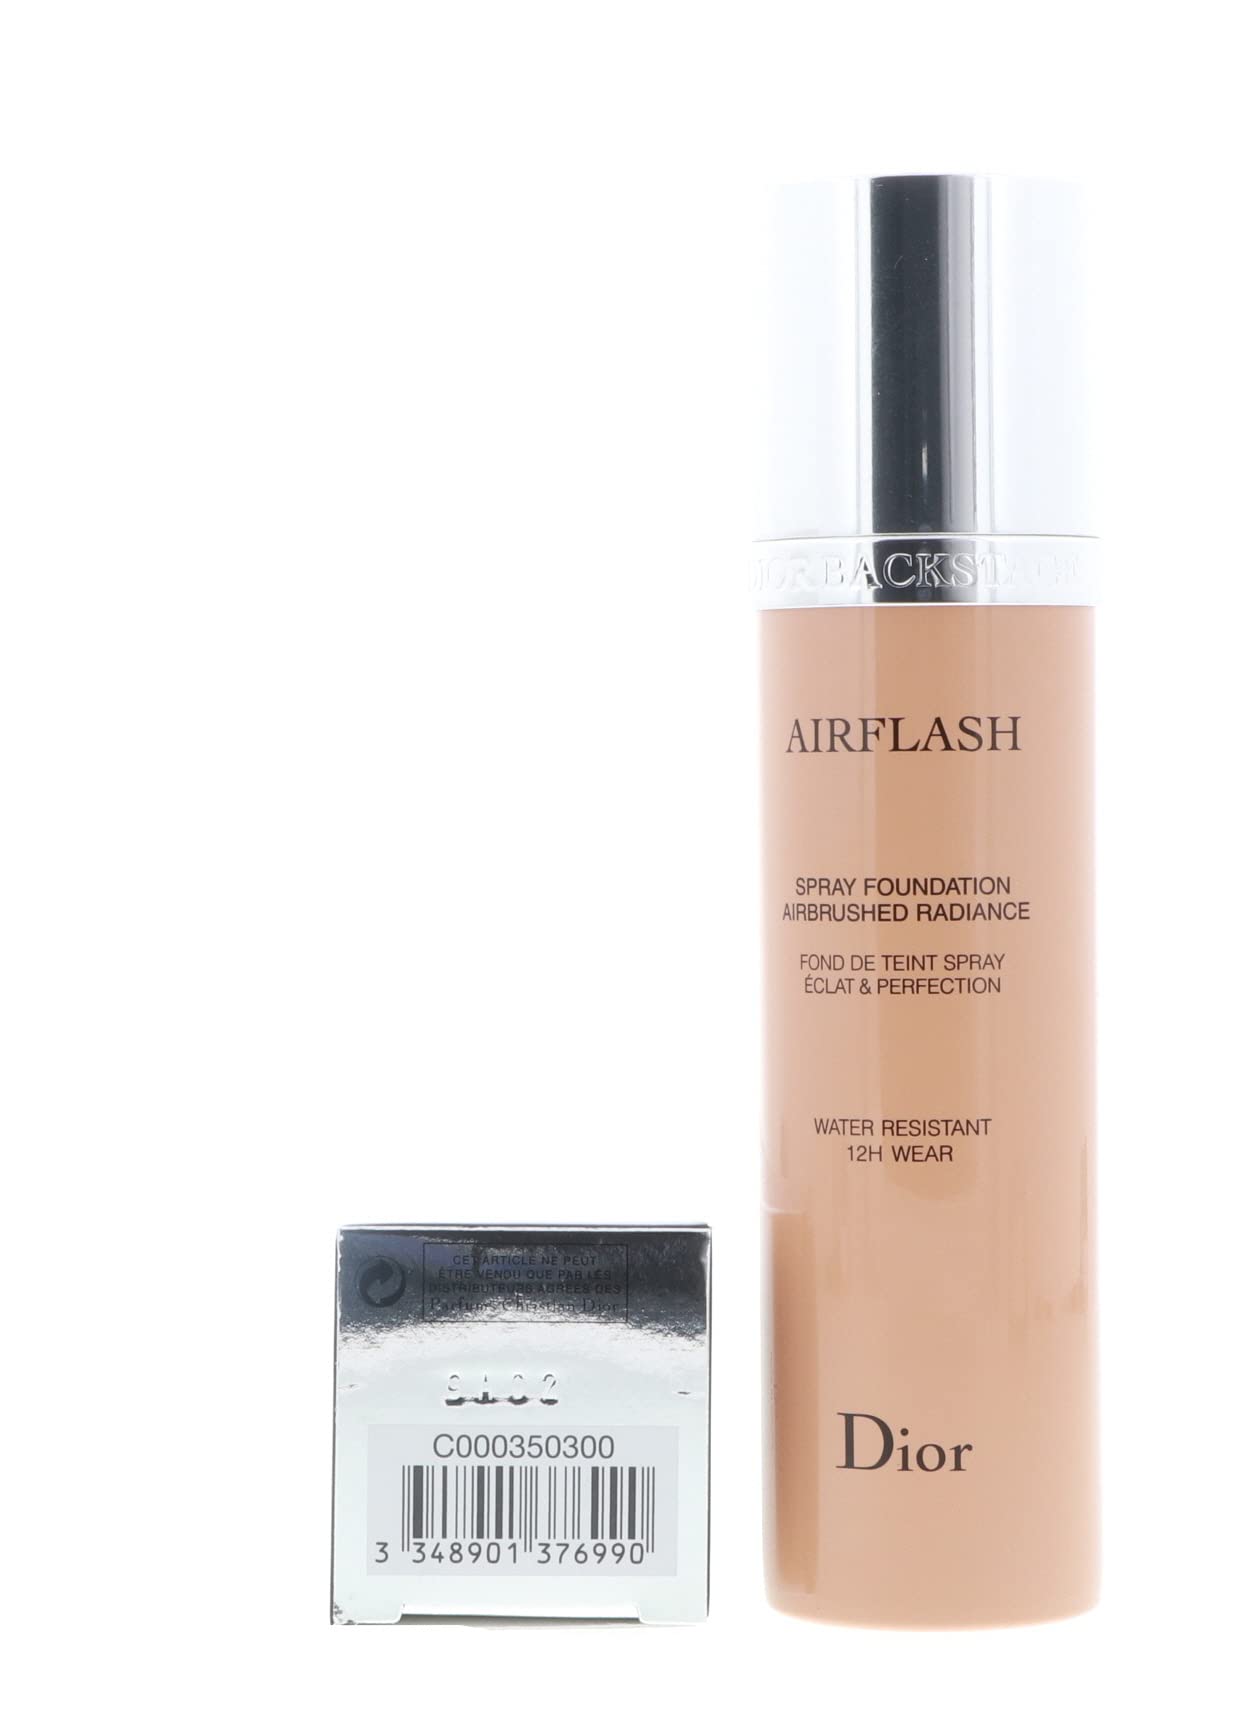 AIRFLASH Spray Foundation Airbrushed Radiance by Dior Choose Your Shade NU   eBay